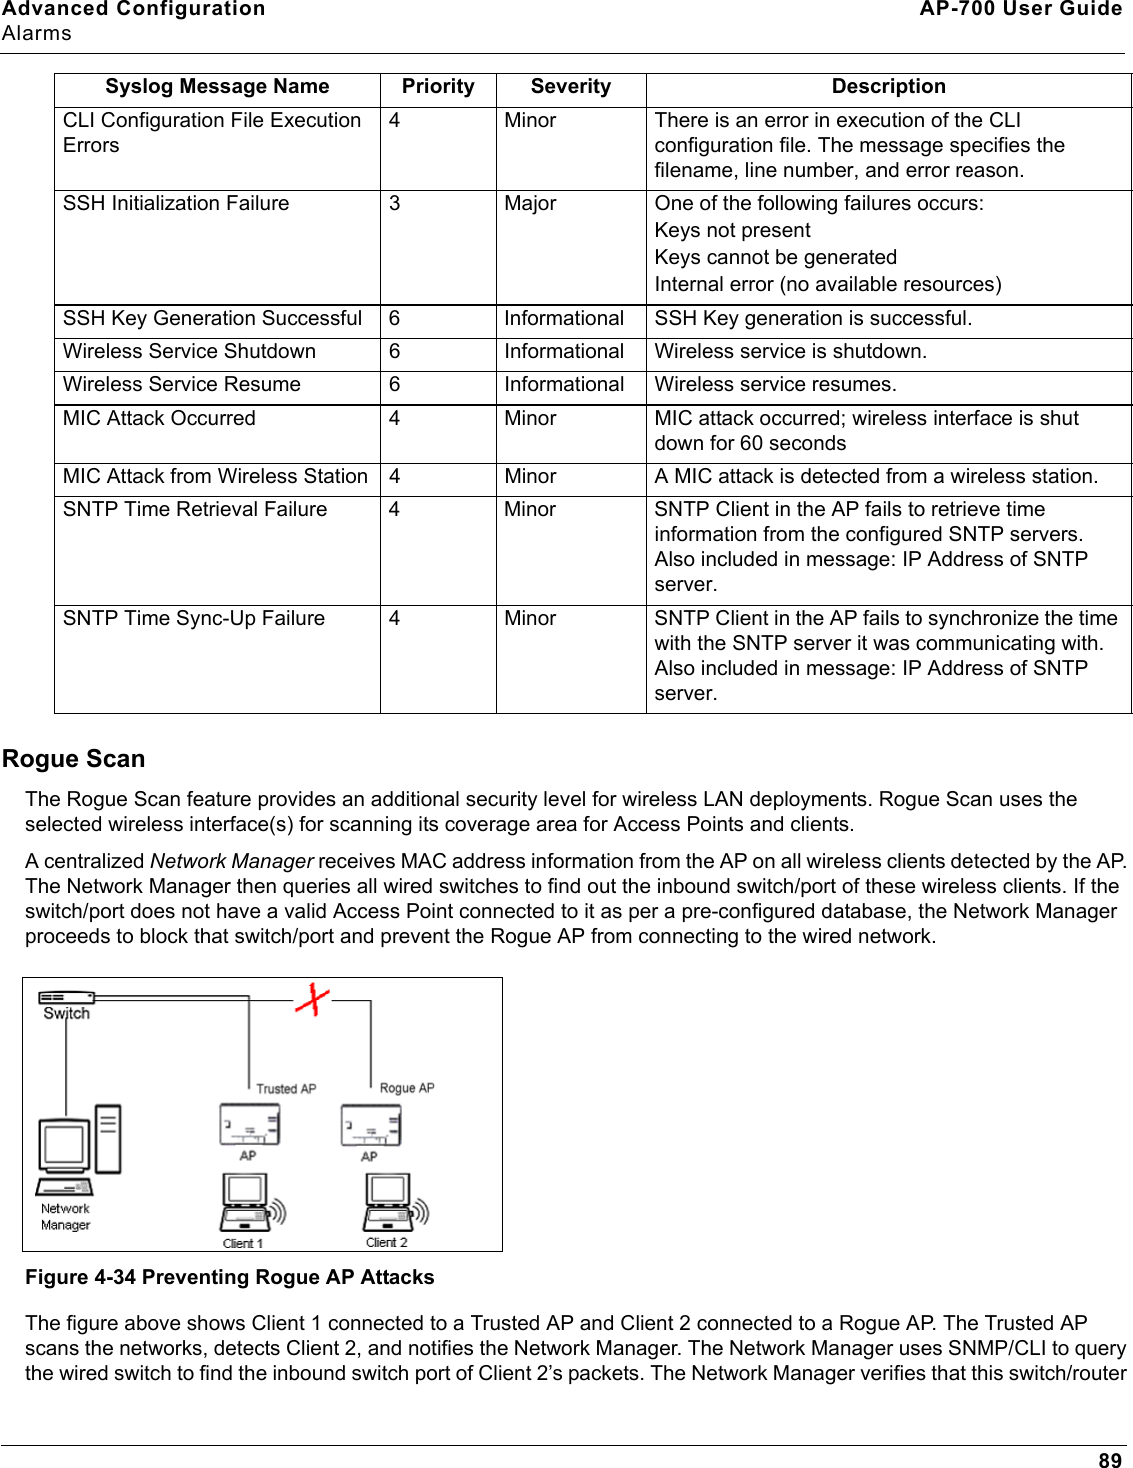 Advanced Configuration AP-700 User GuideAlarms89Rogue ScanThe Rogue Scan feature provides an additional security level for wireless LAN deployments. Rogue Scan uses the selected wireless interface(s) for scanning its coverage area for Access Points and clients.A centralized Network Manager receives MAC address information from the AP on all wireless clients detected by the AP. The Network Manager then queries all wired switches to find out the inbound switch/port of these wireless clients. If the switch/port does not have a valid Access Point connected to it as per a pre-configured database, the Network Manager proceeds to block that switch/port and prevent the Rogue AP from connecting to the wired network.Figure 4-34 Preventing Rogue AP AttacksThe figure above shows Client 1 connected to a Trusted AP and Client 2 connected to a Rogue AP. The Trusted AP scans the networks, detects Client 2, and notifies the Network Manager. The Network Manager uses SNMP/CLI to query the wired switch to find the inbound switch port of Client 2’s packets. The Network Manager verifies that this switch/router CLI Configuration File Execution Errors4 Minor There is an error in execution of the CLI configuration file. The message specifies the filename, line number, and error reason.SSH Initialization Failure 3 Major One of the following failures occurs:Keys not presentKeys cannot be generatedInternal error (no available resources)SSH Key Generation Successful 6 Informational SSH Key generation is successful.Wireless Service Shutdown 6 Informational Wireless service is shutdown.Wireless Service Resume 6 Informational Wireless service resumes.MIC Attack Occurred 4 Minor MIC attack occurred; wireless interface is shut down for 60 secondsMIC Attack from Wireless Station 4 Minor A MIC attack is detected from a wireless station.SNTP Time Retrieval Failure 4 Minor SNTP Client in the AP fails to retrieve time information from the configured SNTP servers. Also included in message: IP Address of SNTP server.SNTP Time Sync-Up Failure 4 Minor SNTP Client in the AP fails to synchronize the time with the SNTP server it was communicating with. Also included in message: IP Address of SNTP server.Syslog Message Name Priority Severity Description